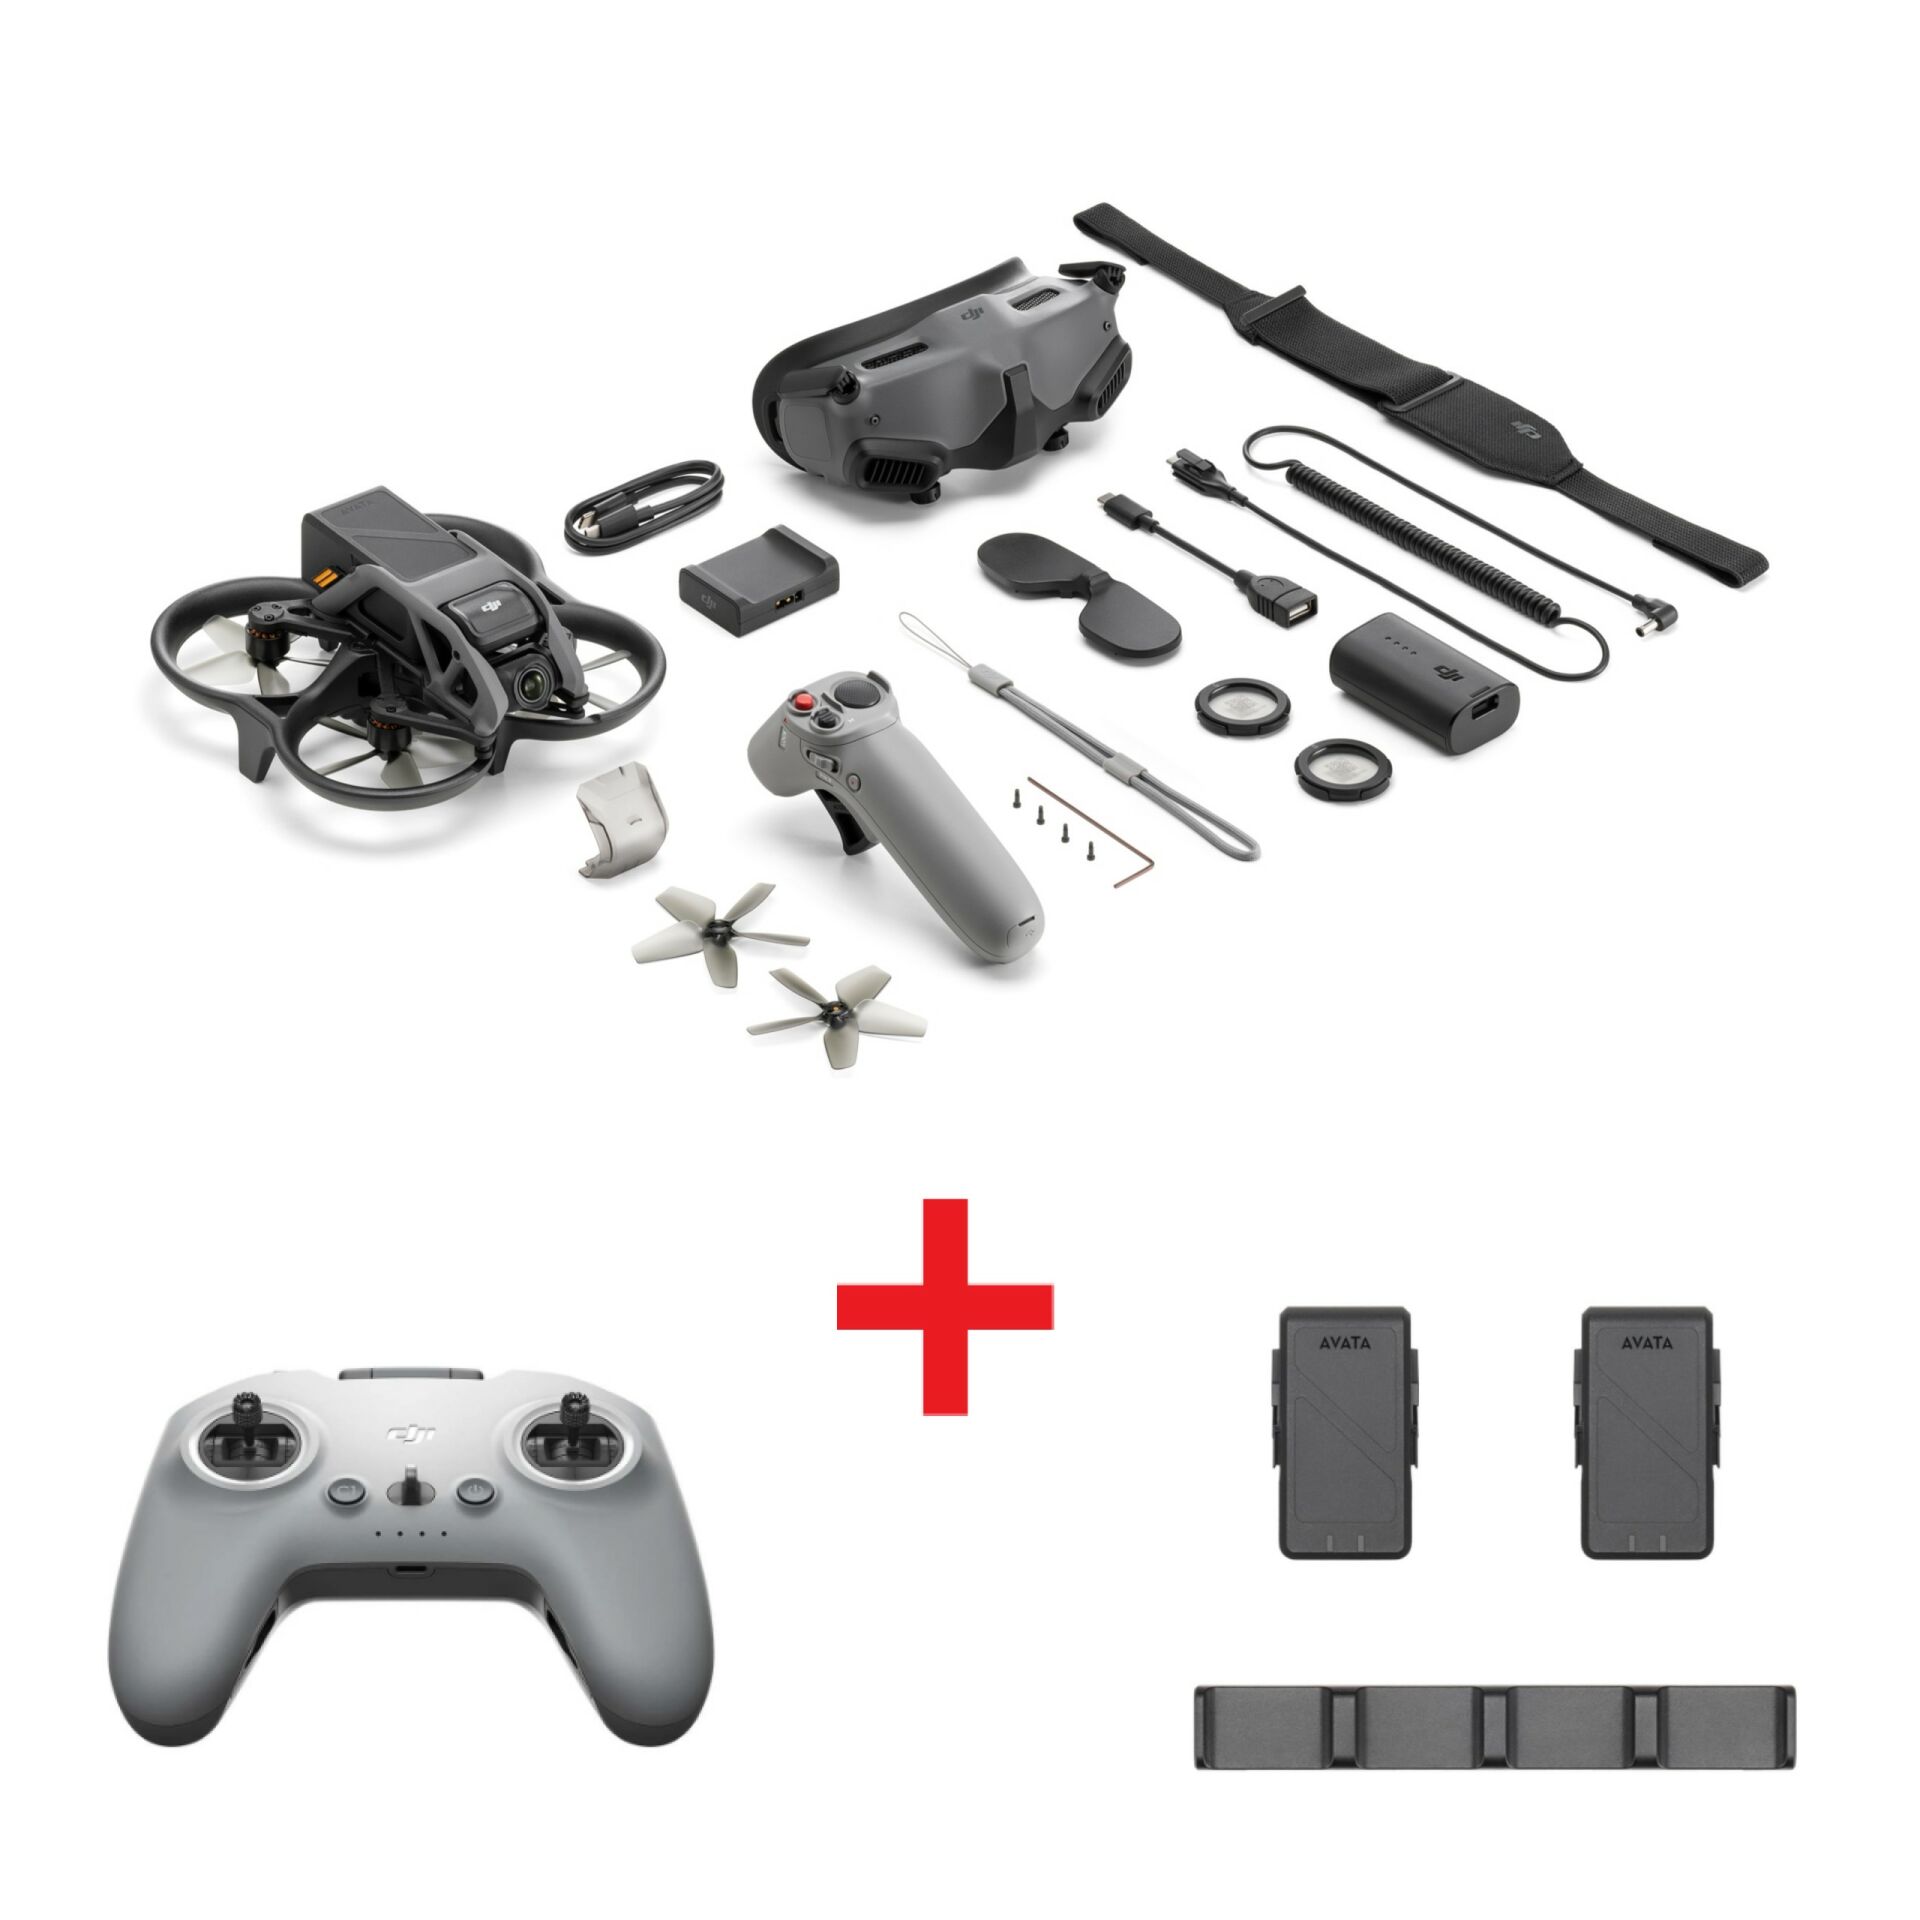 DJI AVATA PRO VİEW COMBO + REMOTE CONTROLLER 2 + FLY MORE KİT SET